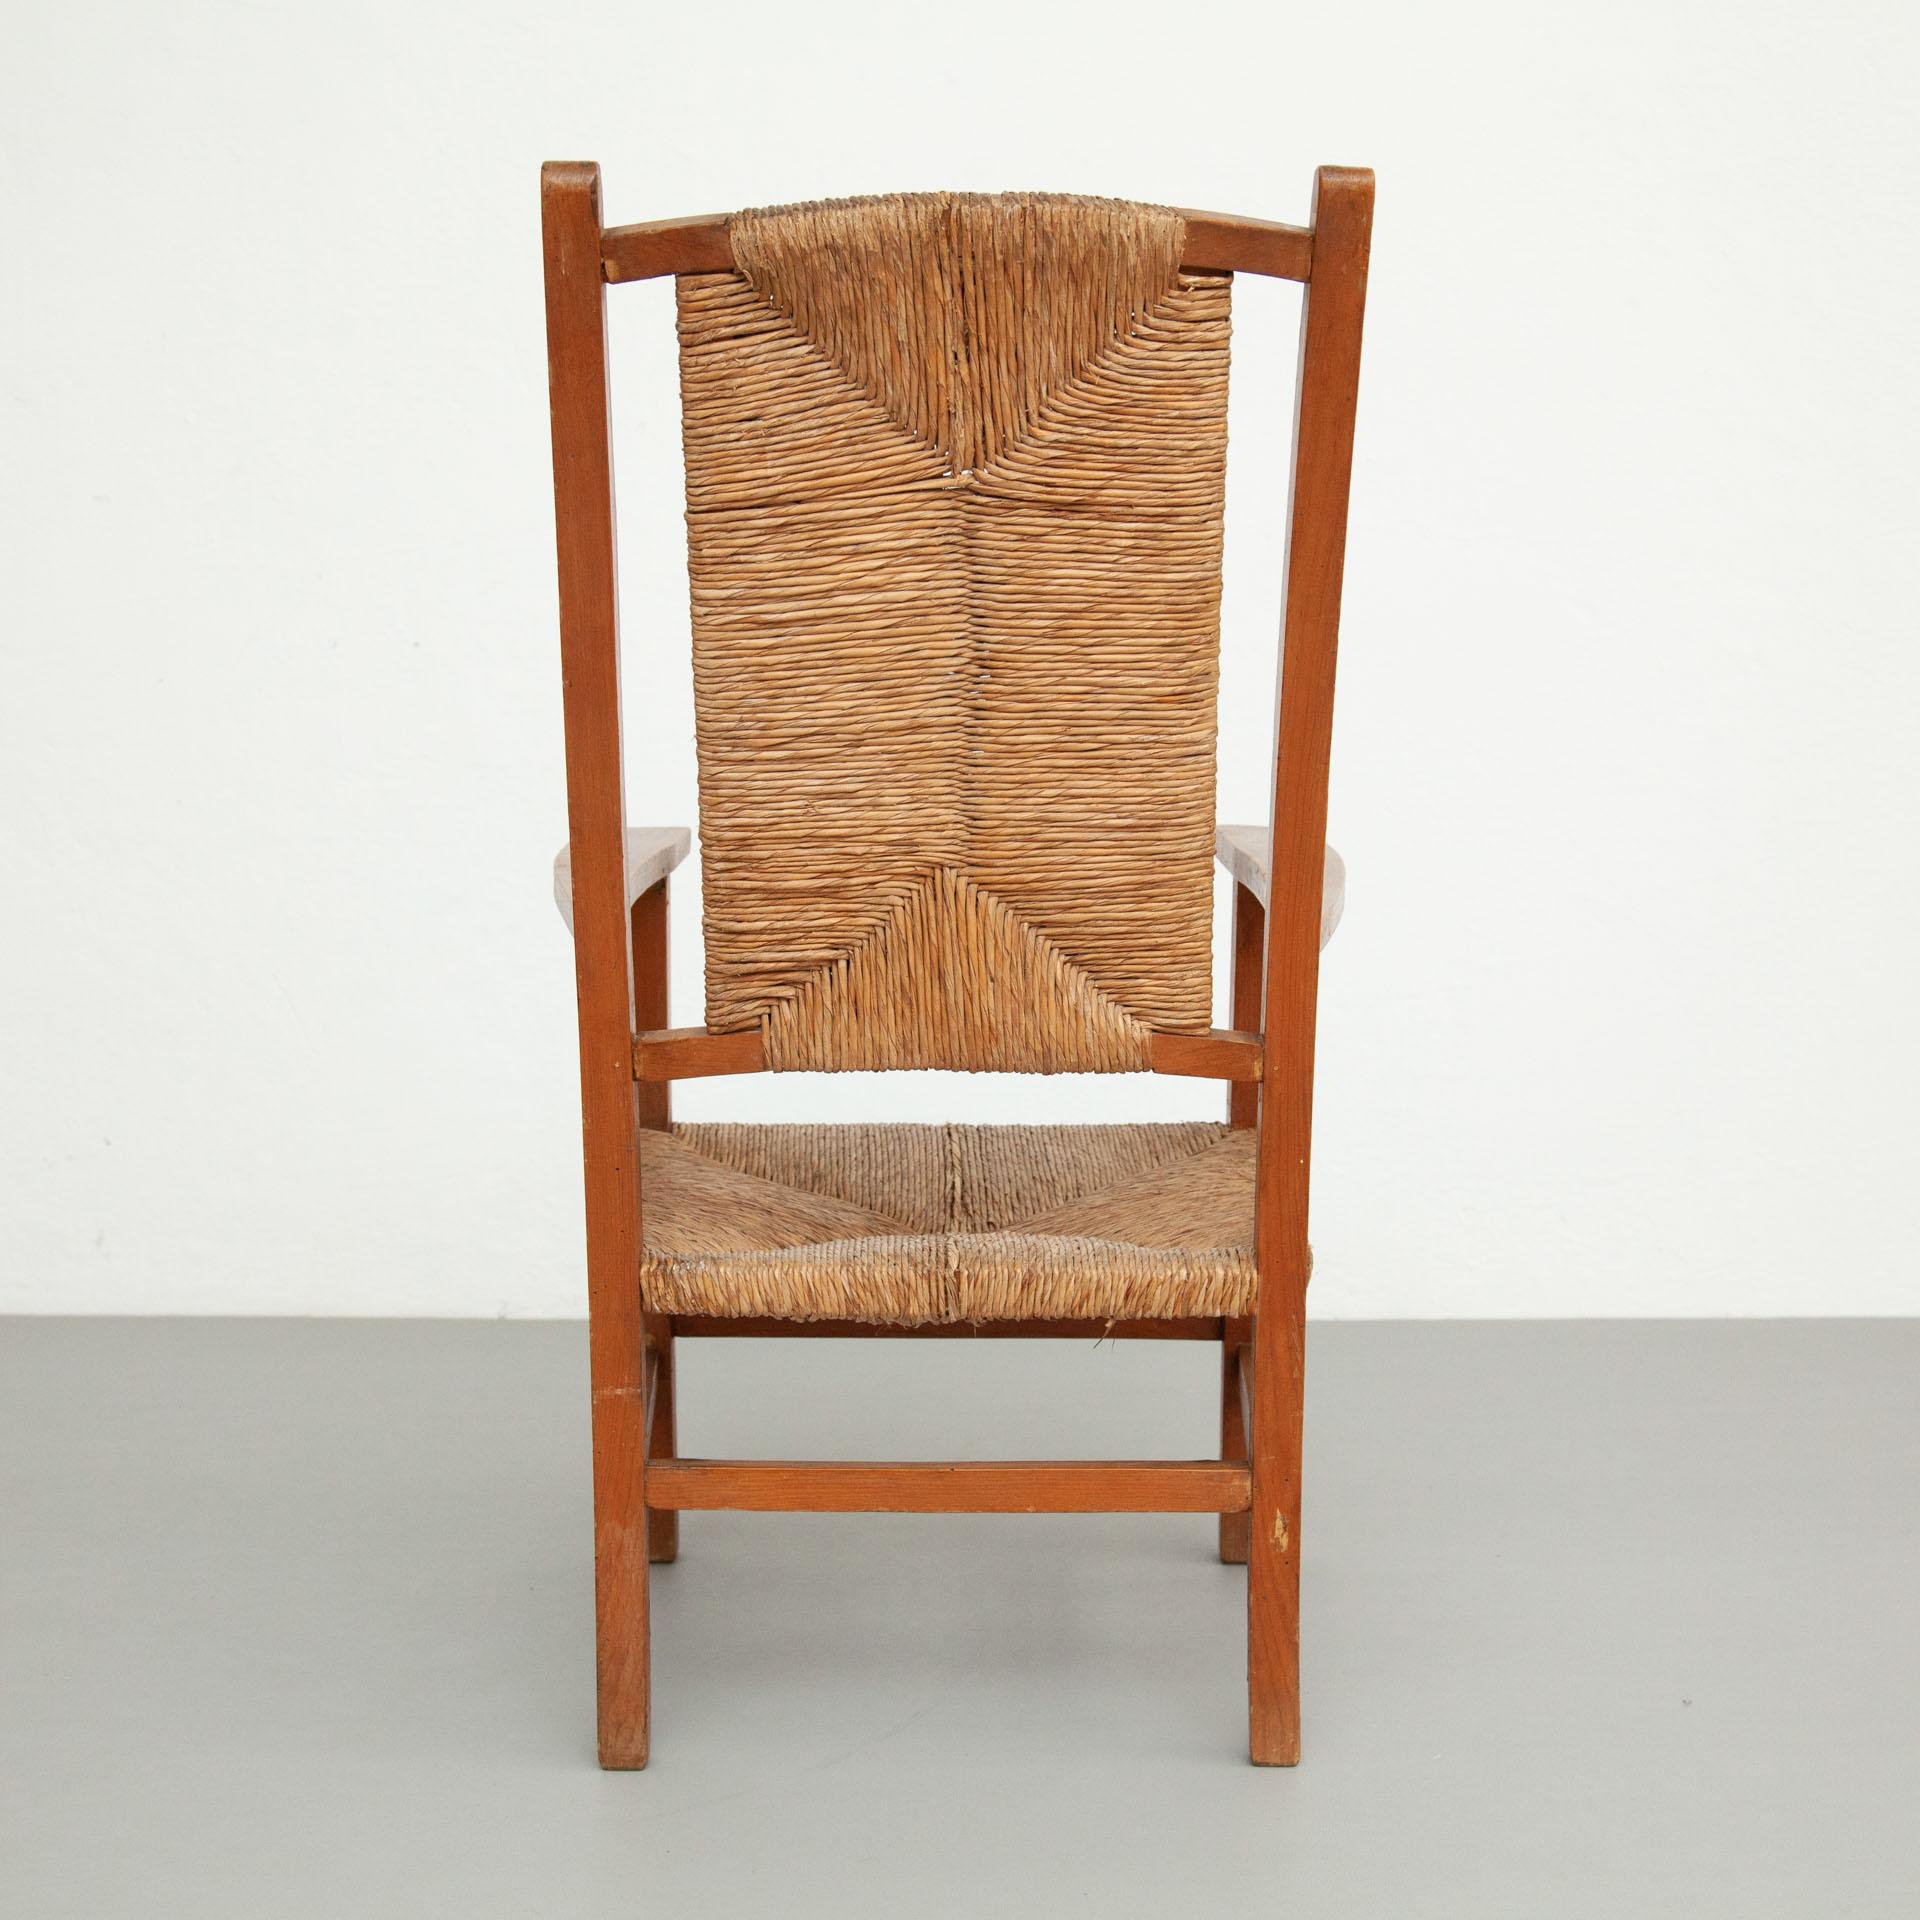 French Mid-Century Modern Wood and Rattan Chair, circa 1940